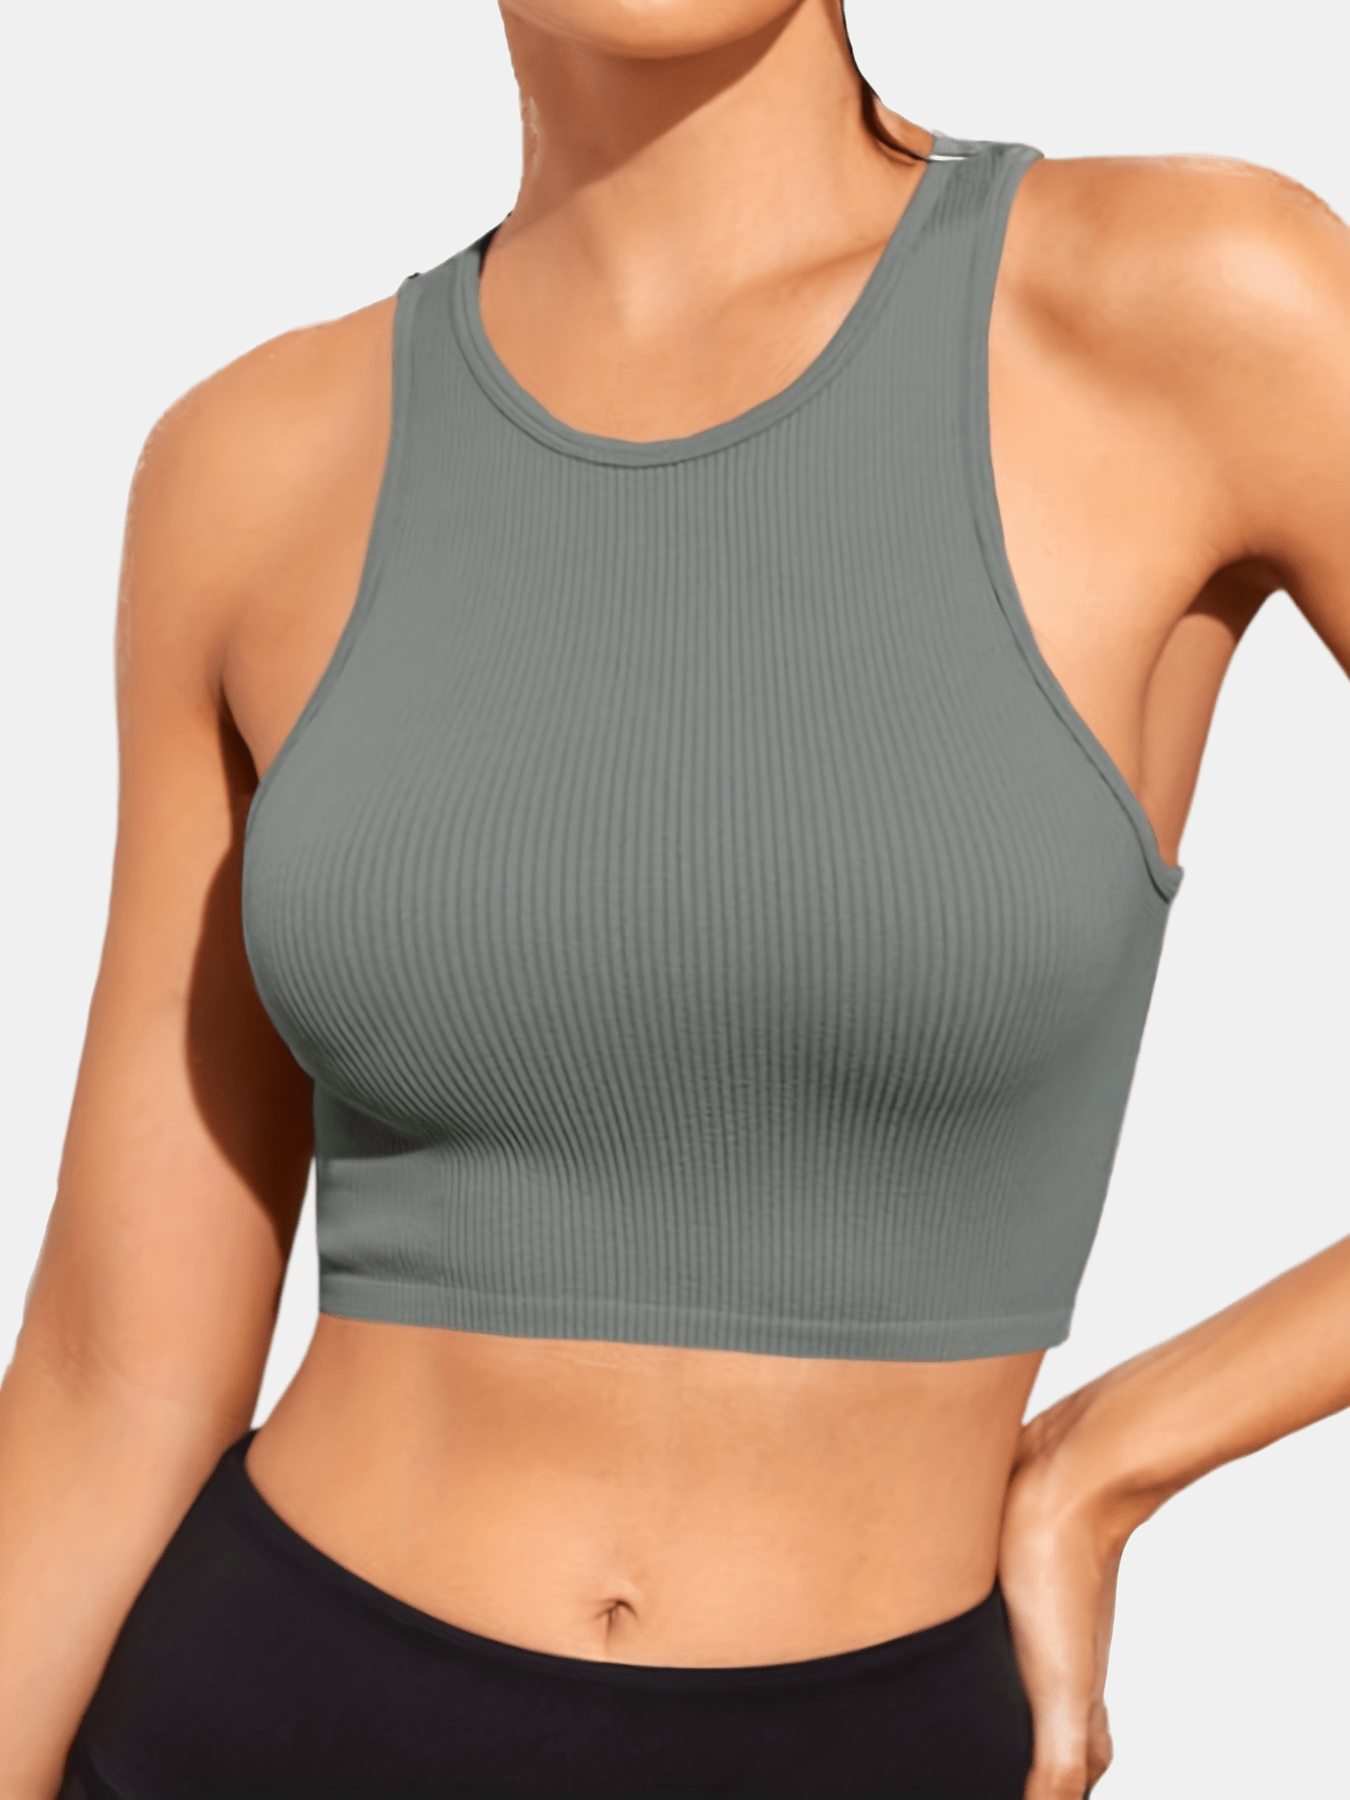  Brown Tank Top for Women Athletic Quick Dry Yoga